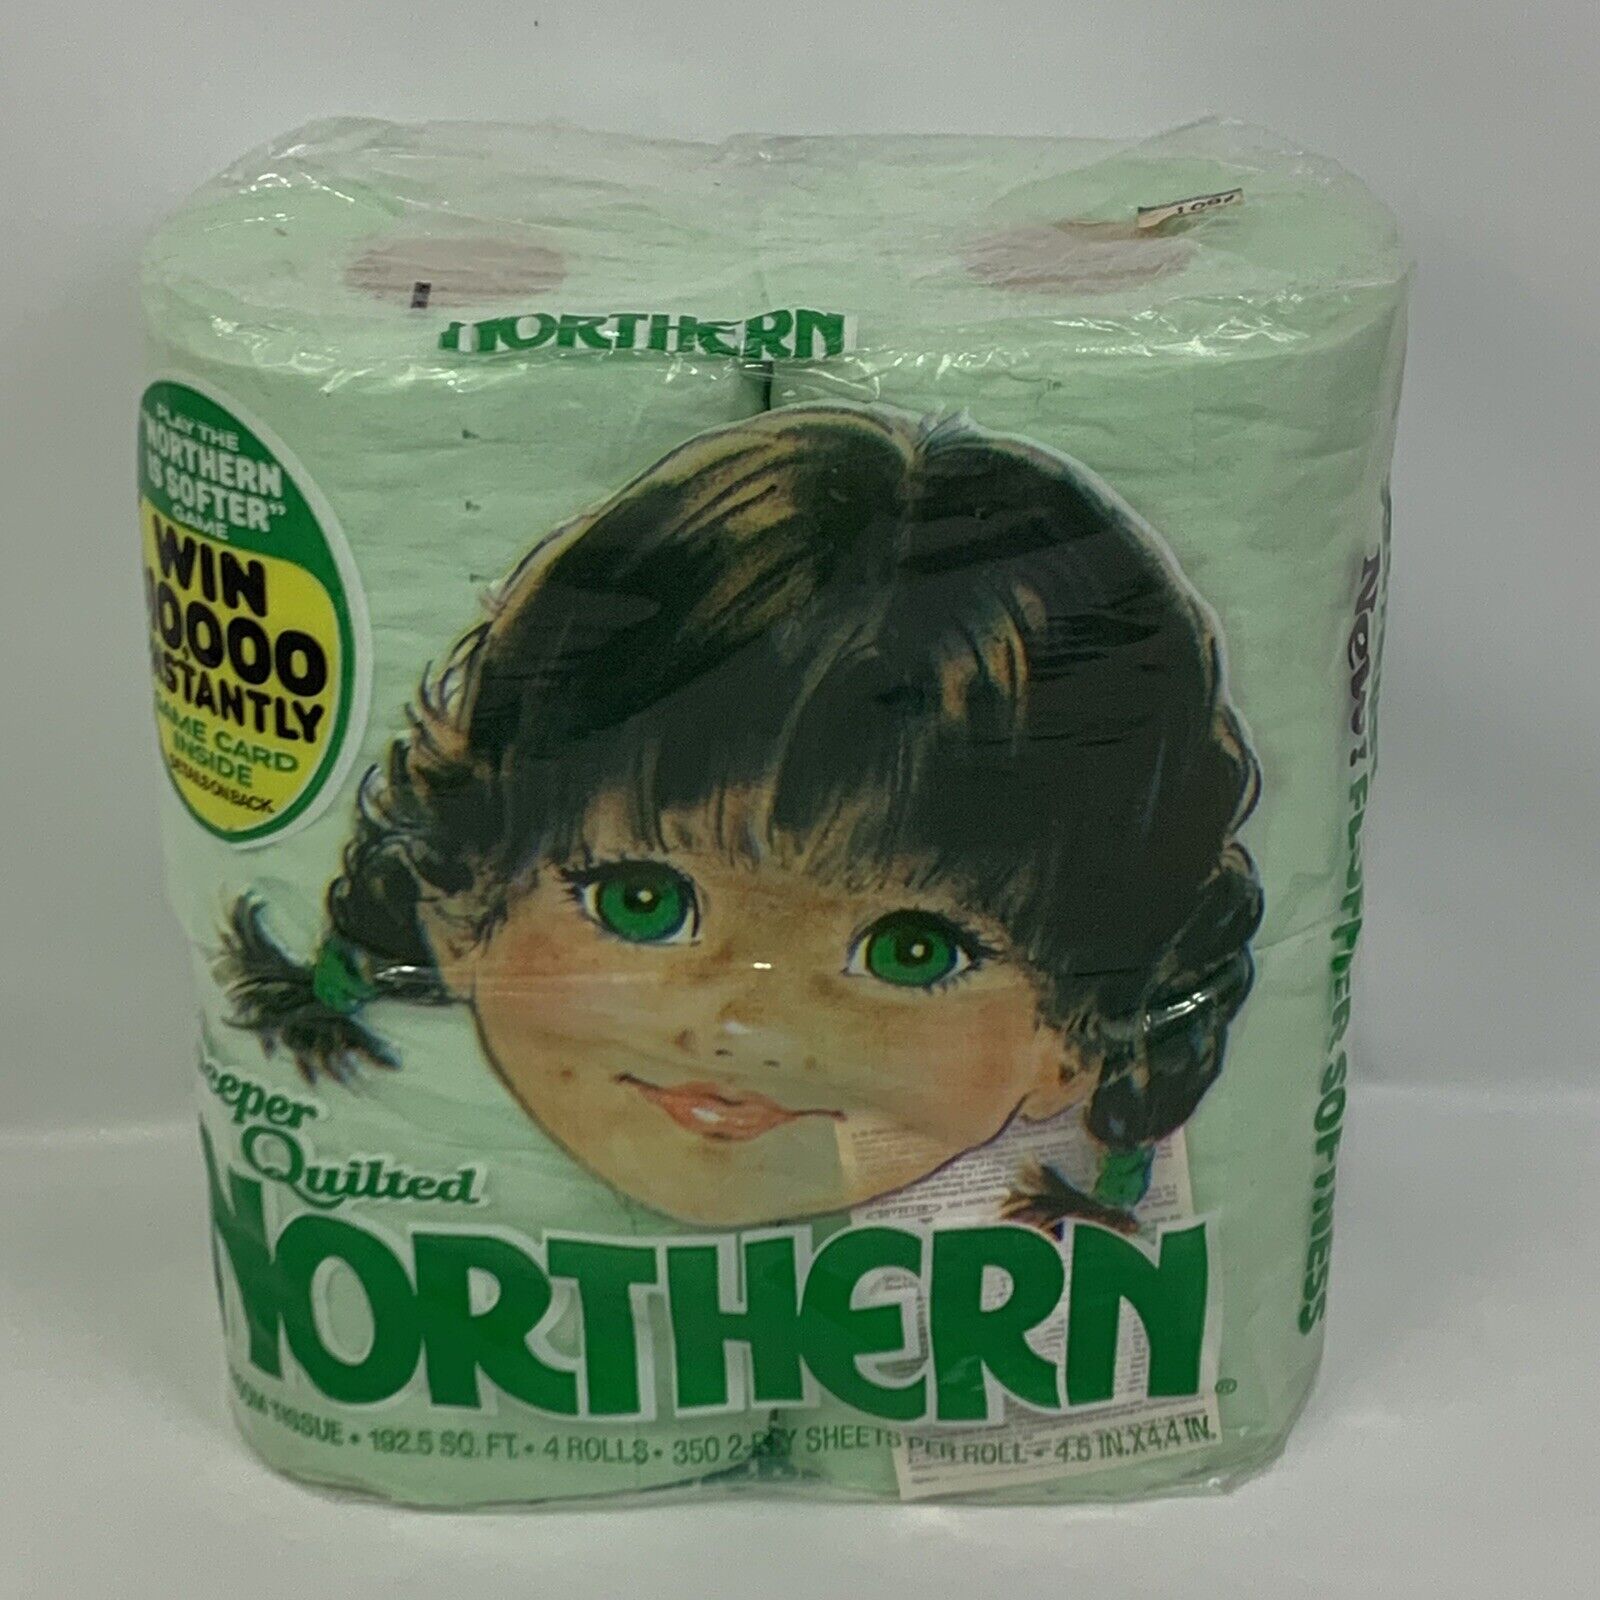 Vintage 80’s Quilted Northern Green Toilet Paper 4-pack Sealed NEW TV Movie Prop